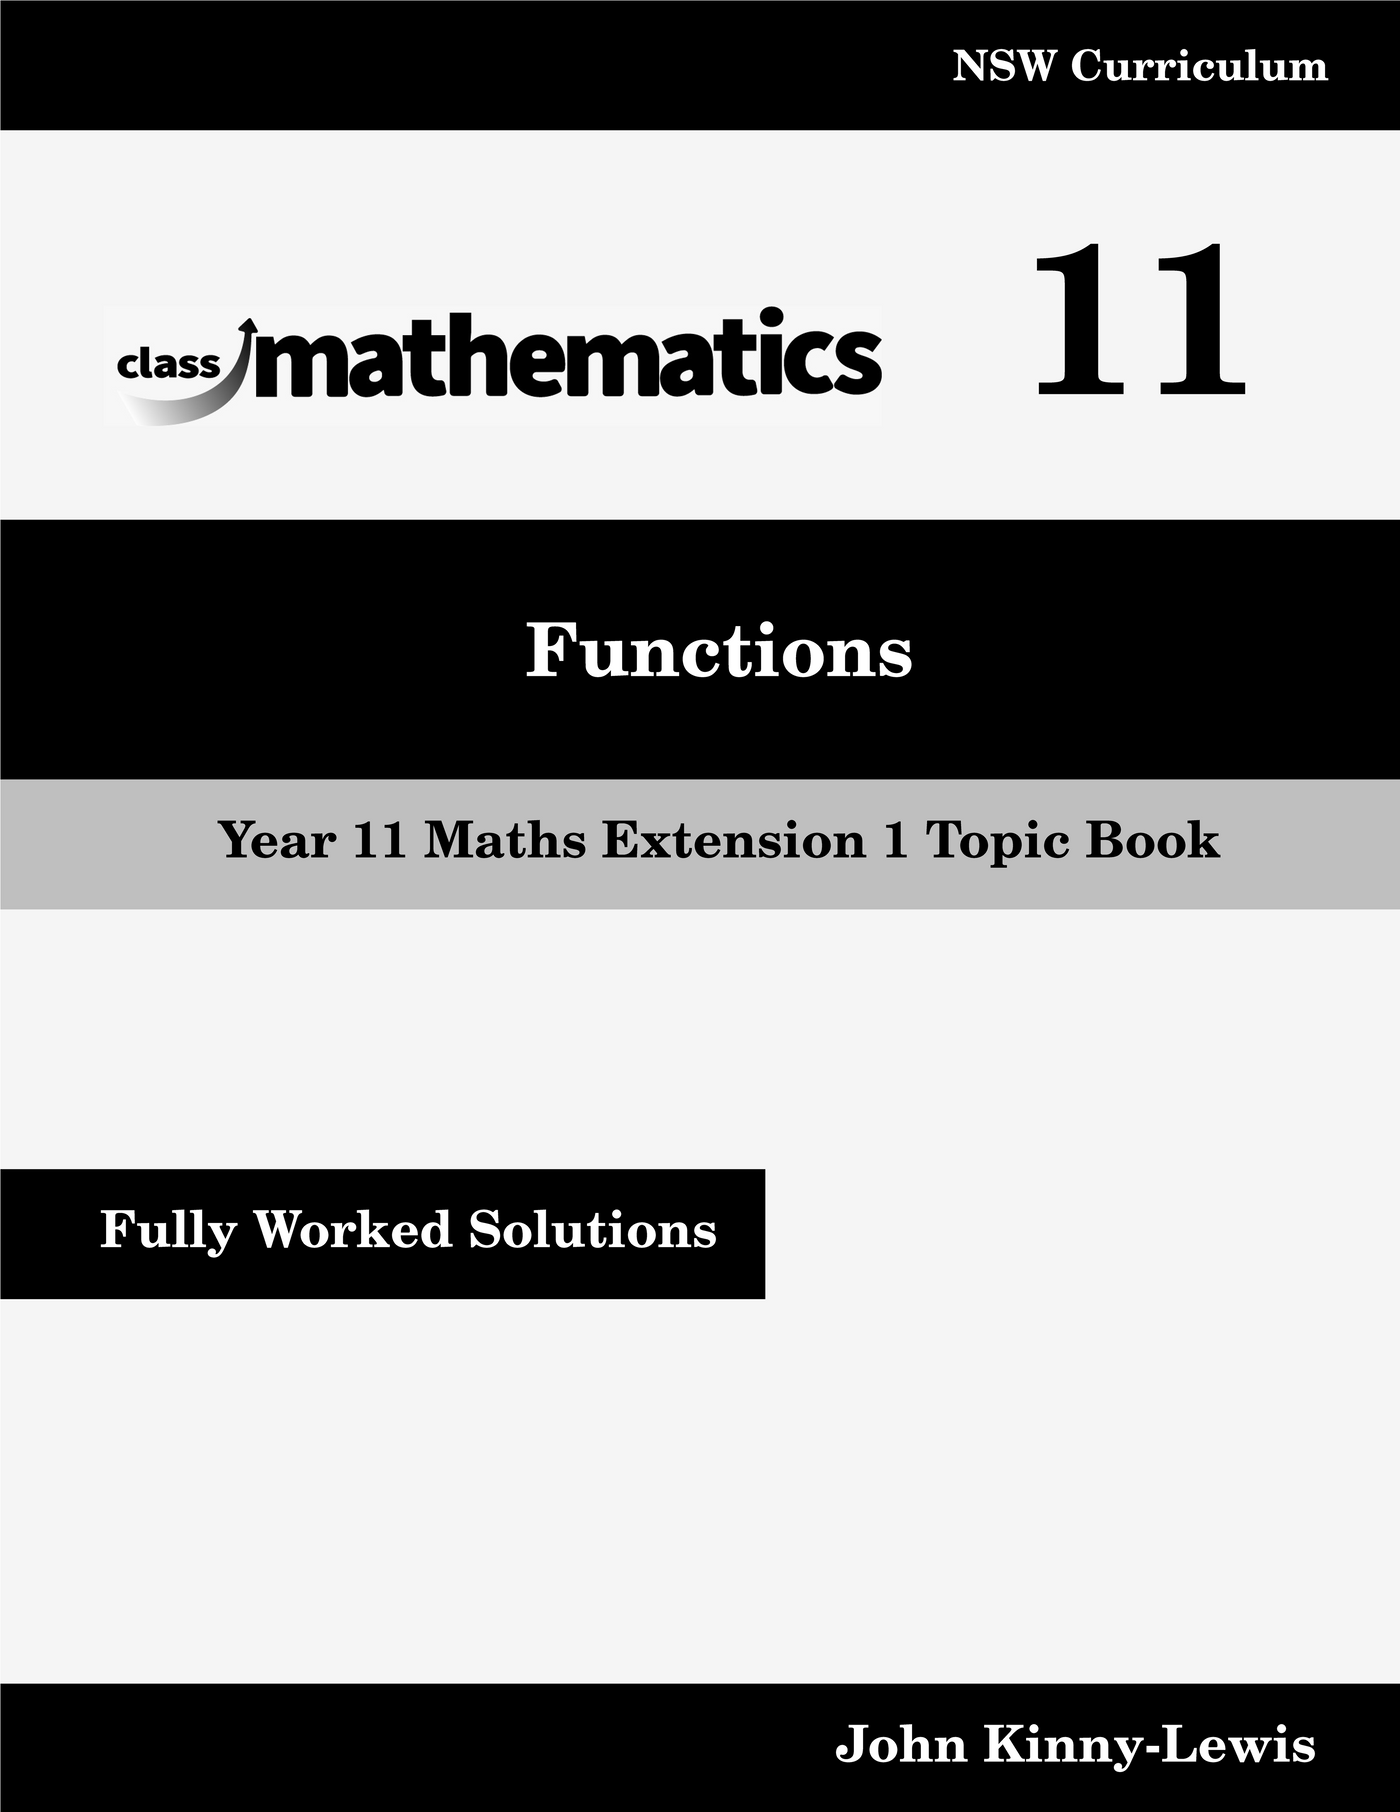 NSW Year 11 Maths Extension 1 - Functions